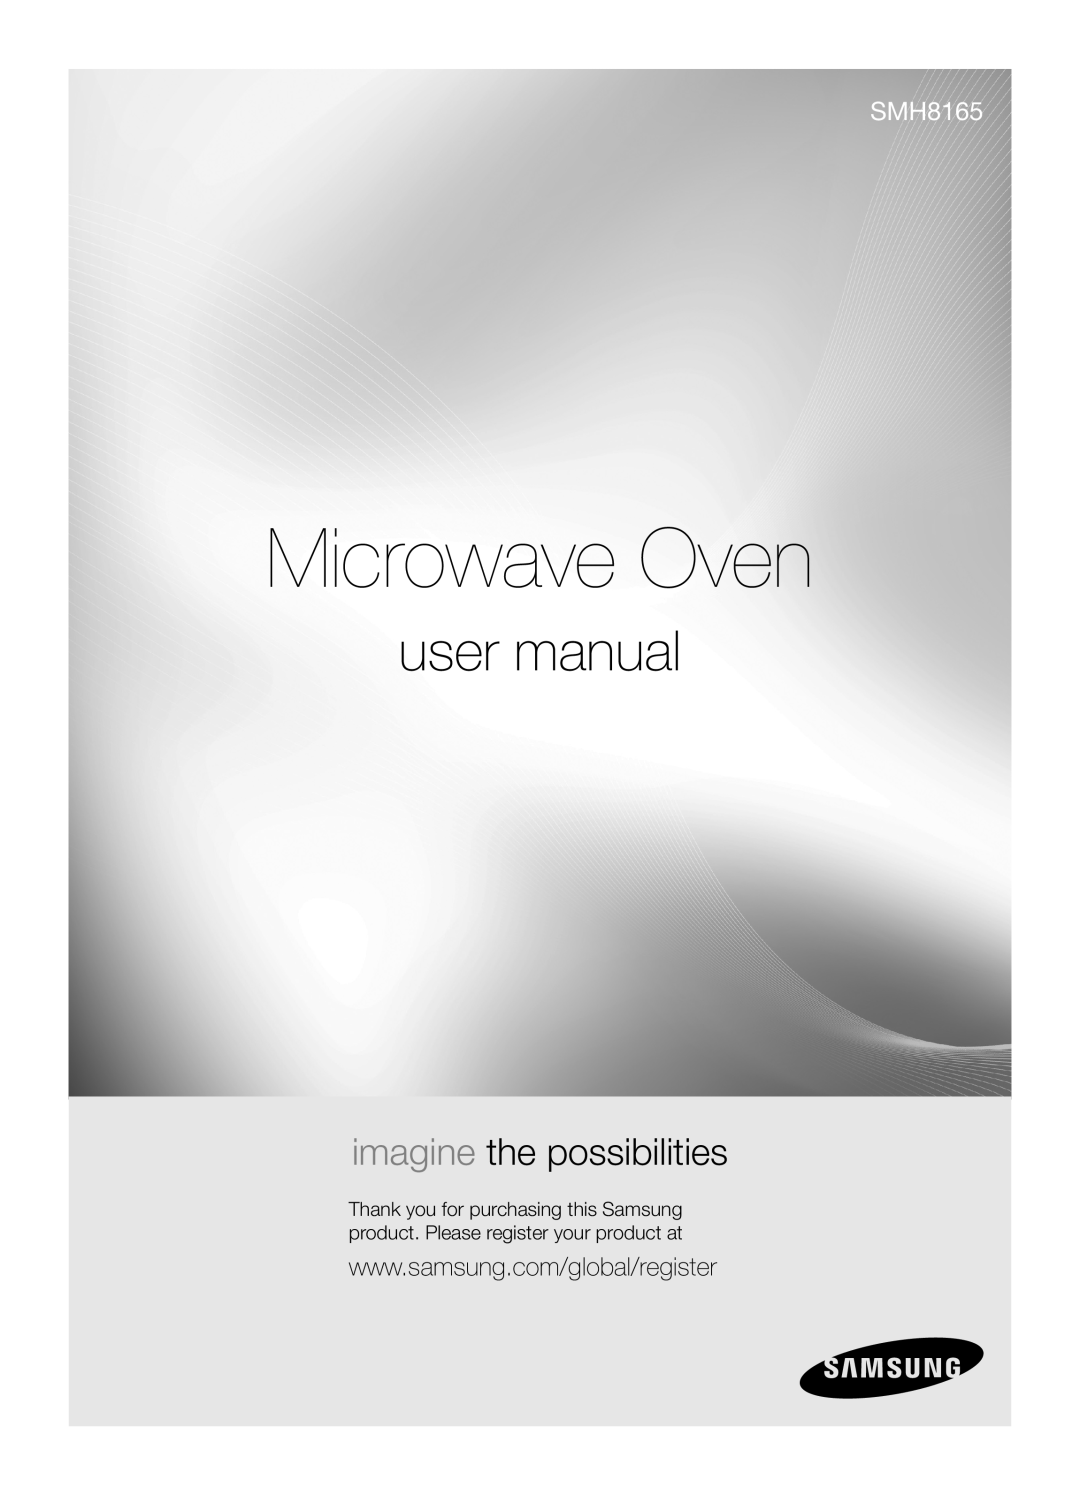 Samsung SMH8165STE user manual Microwave Oven, imagine the possibilities 